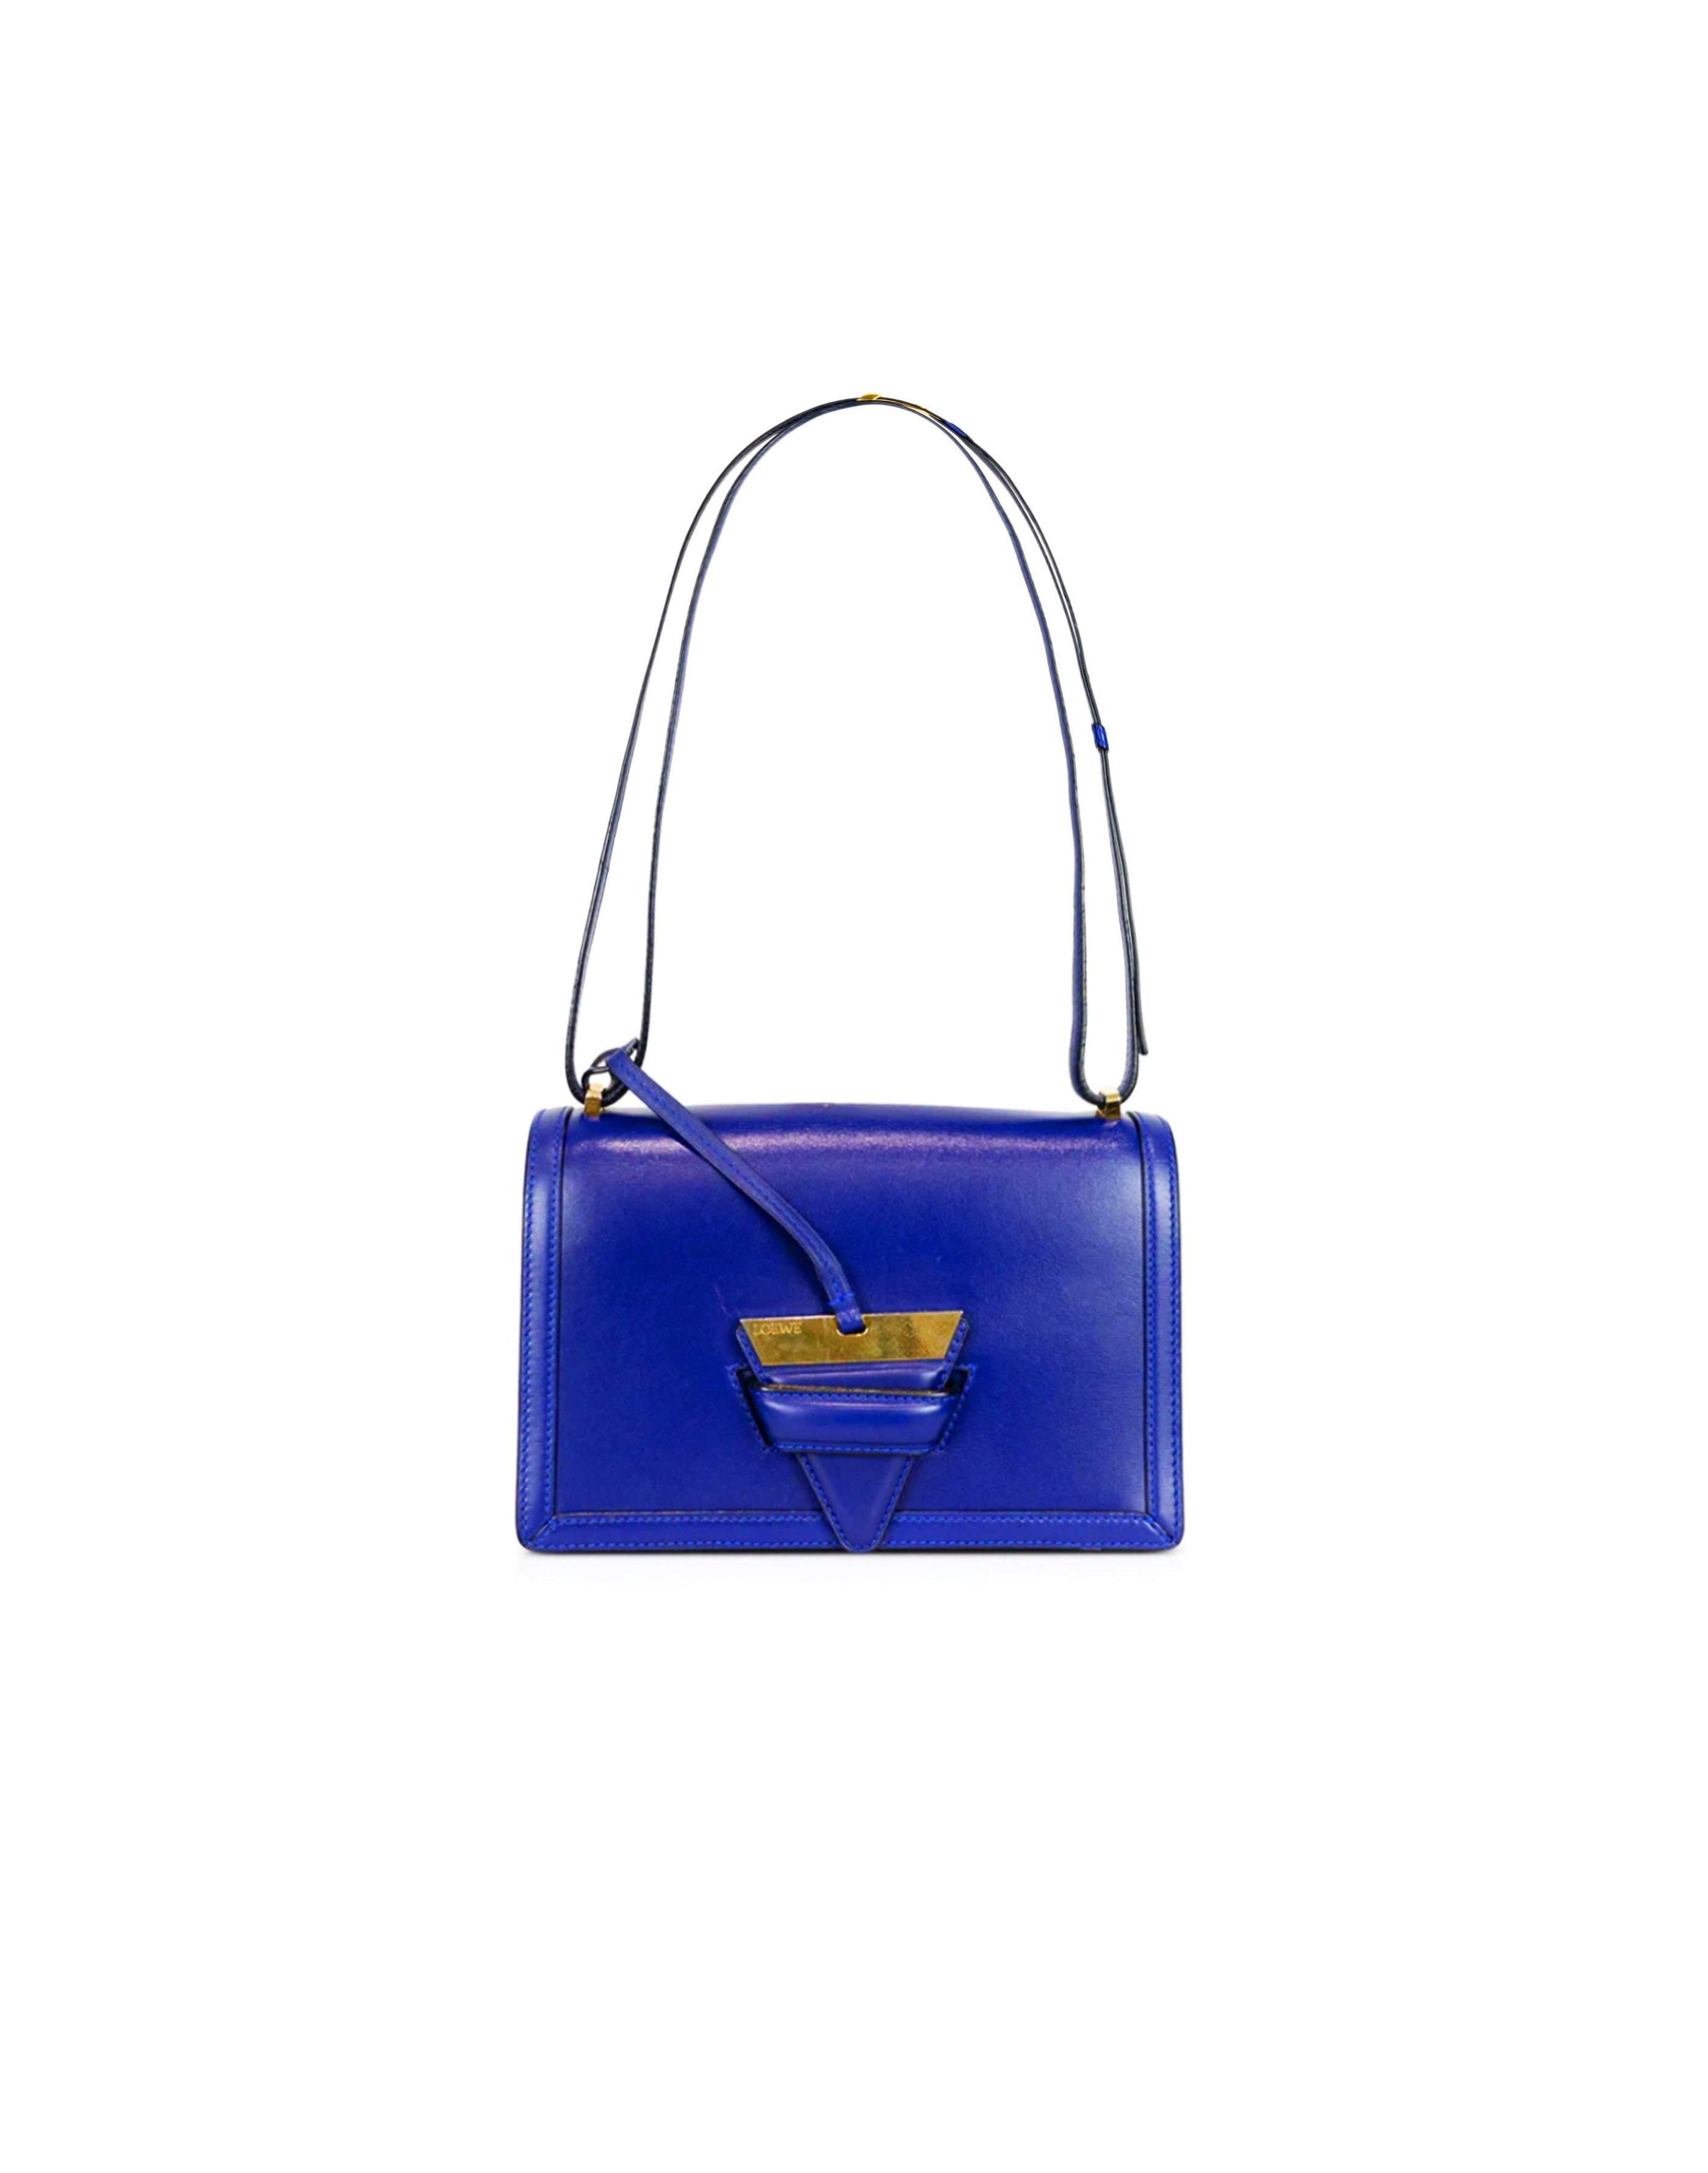 Loewe Blue Barcelona Leather Bag – Into Archive